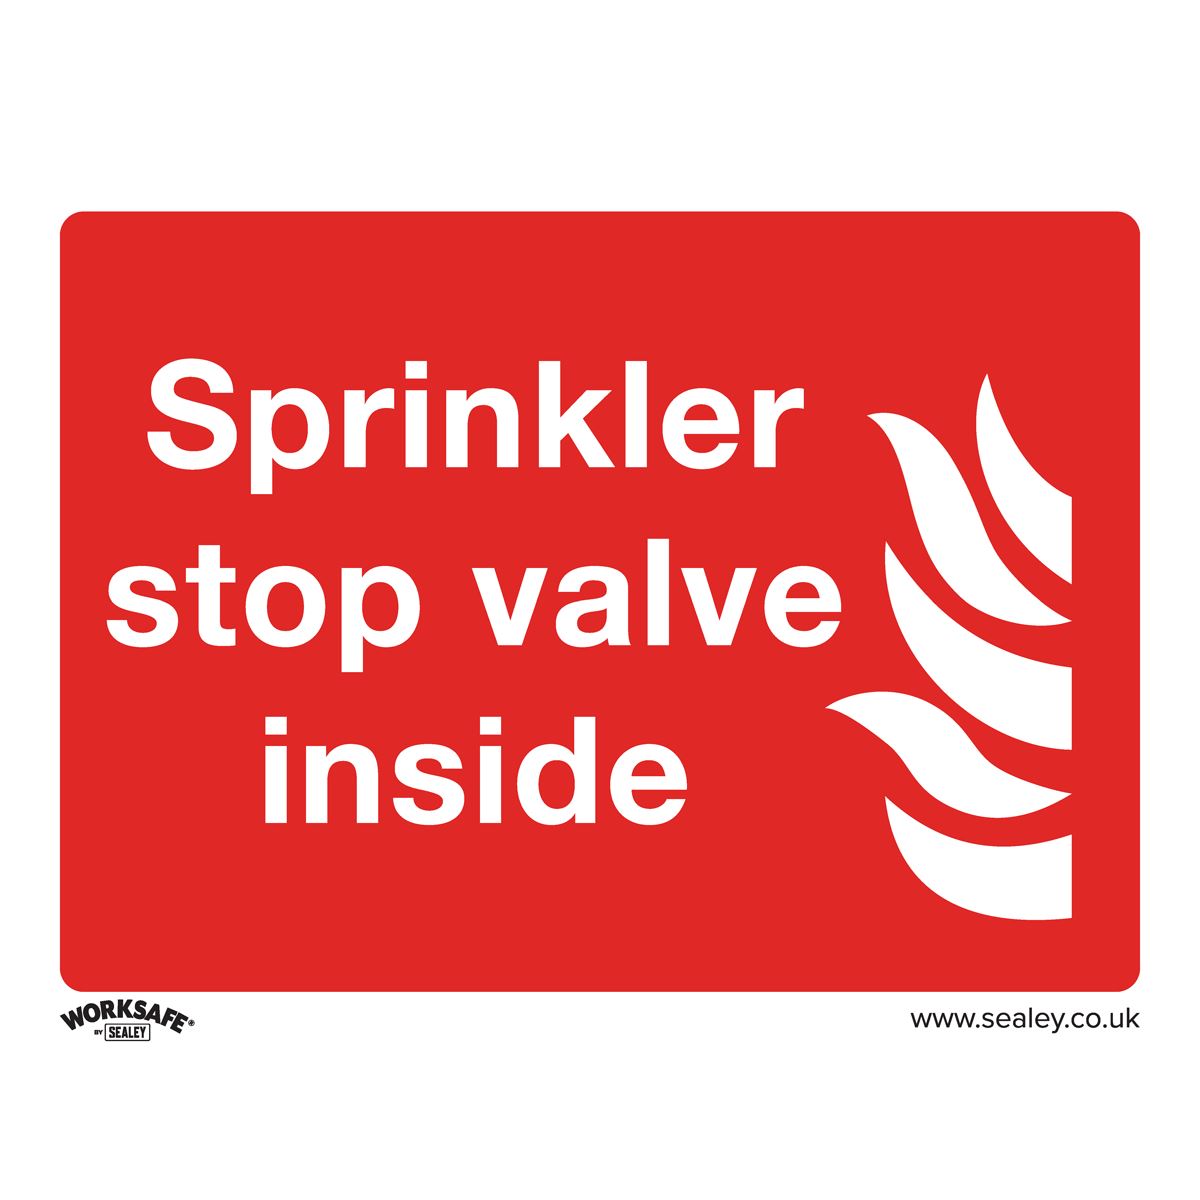 Worksafe by Sealey Safe Conditions Safety Sign - Sprinkler Stop Valve - Self-Adhesive Vinyl - Pack of 10